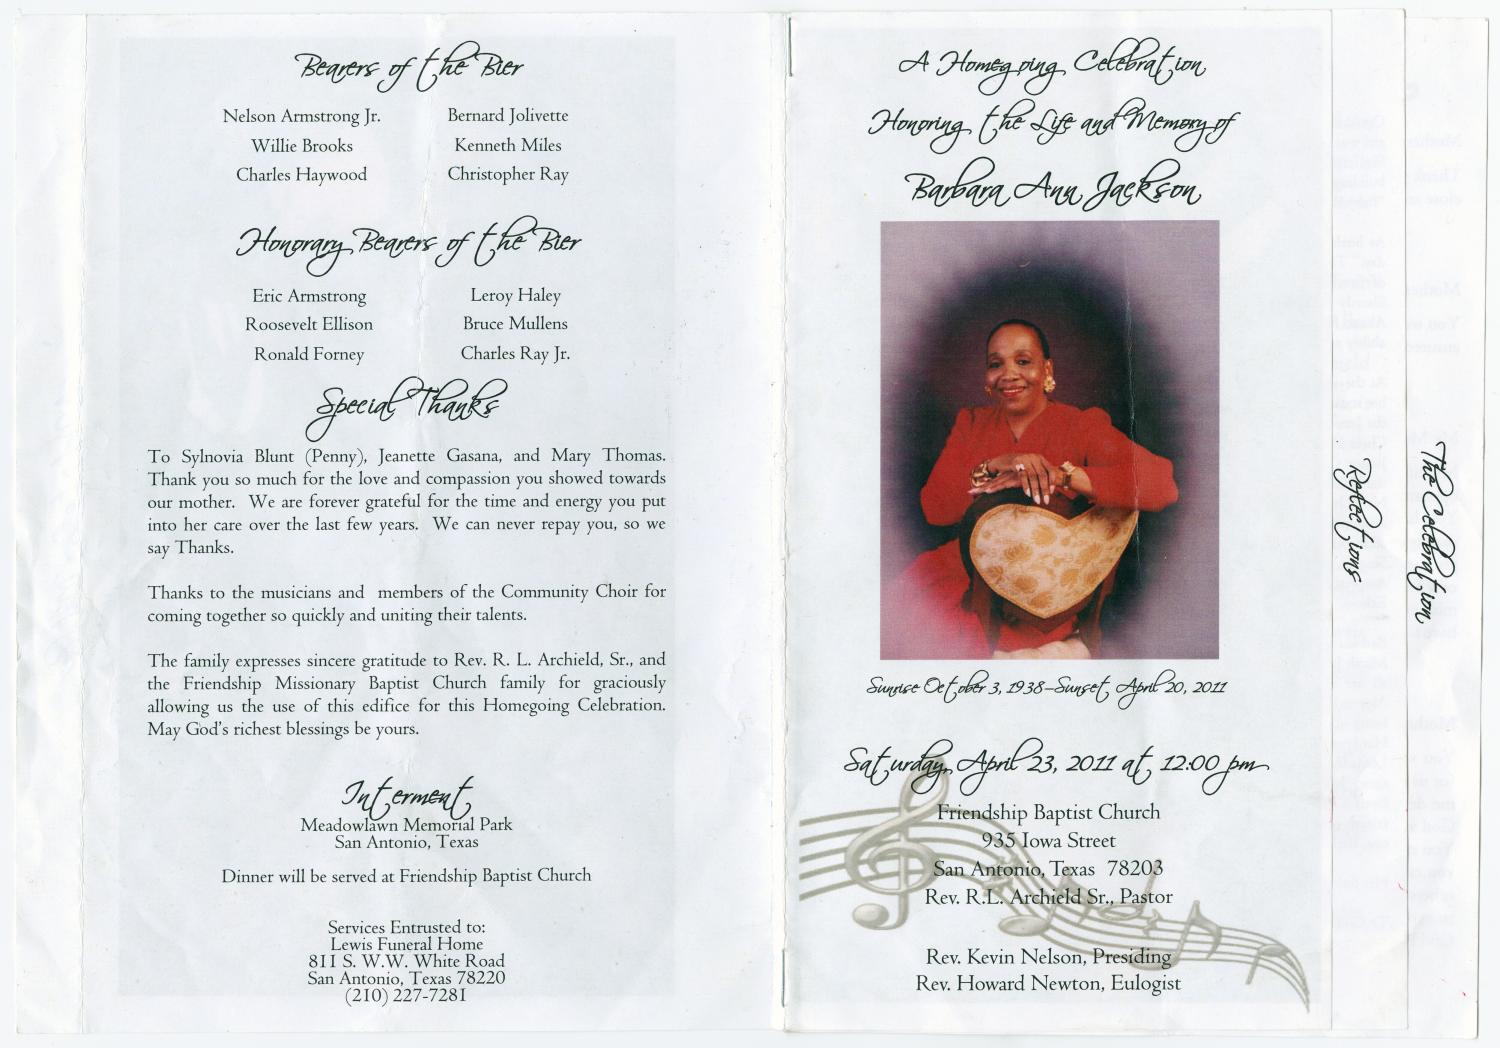 [Funeral Program for Barbara Ann Jackson, April 23, 2011]
                                                
                                                    [Sequence #]: 5 of 5
                                                